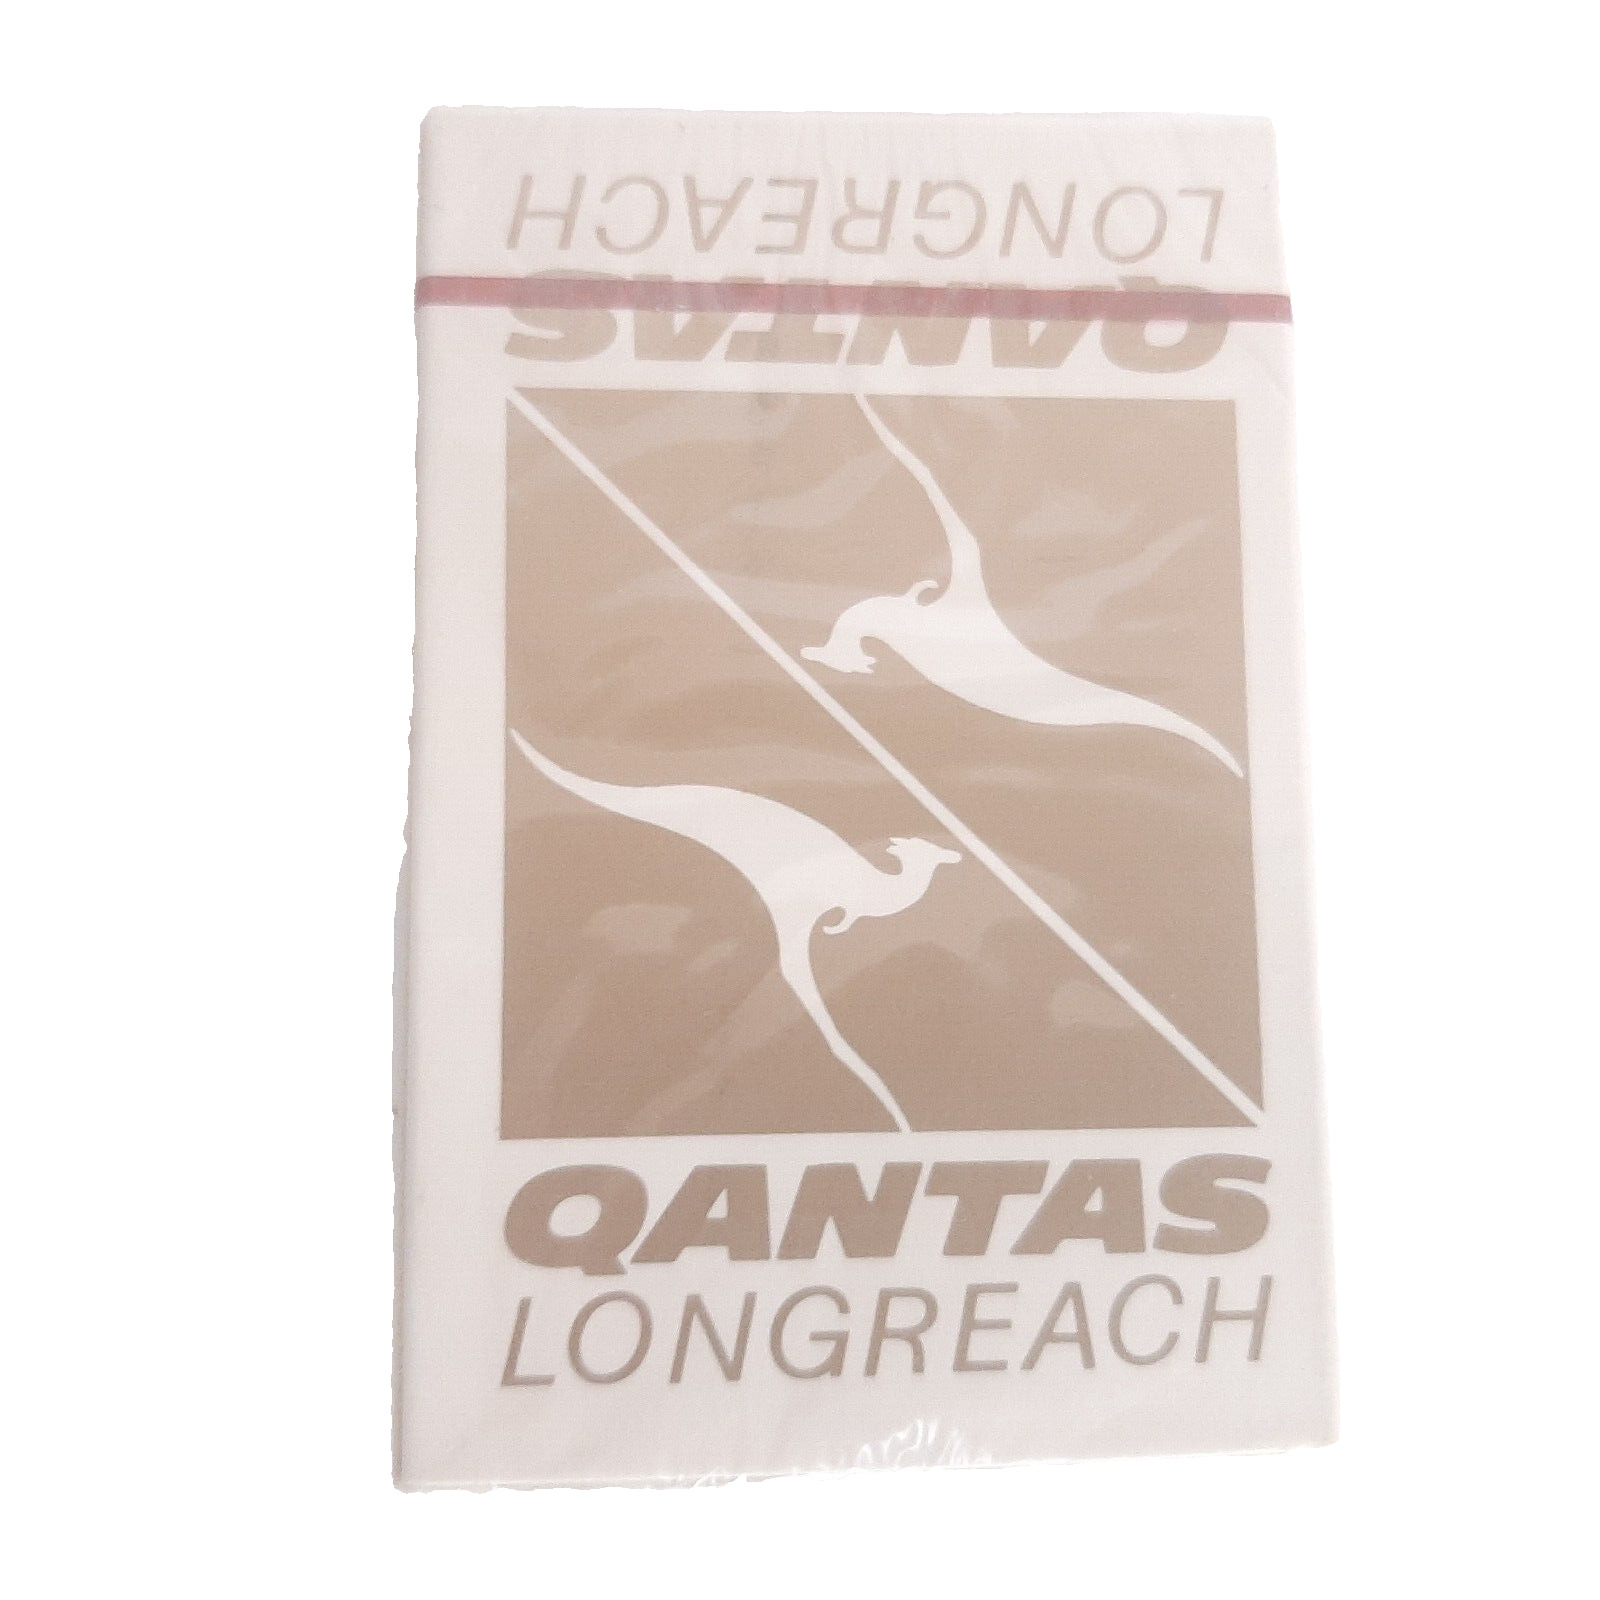 Vintage Qantas Airlines LongReach Playing Cards Deck Brand New Factory Sealed